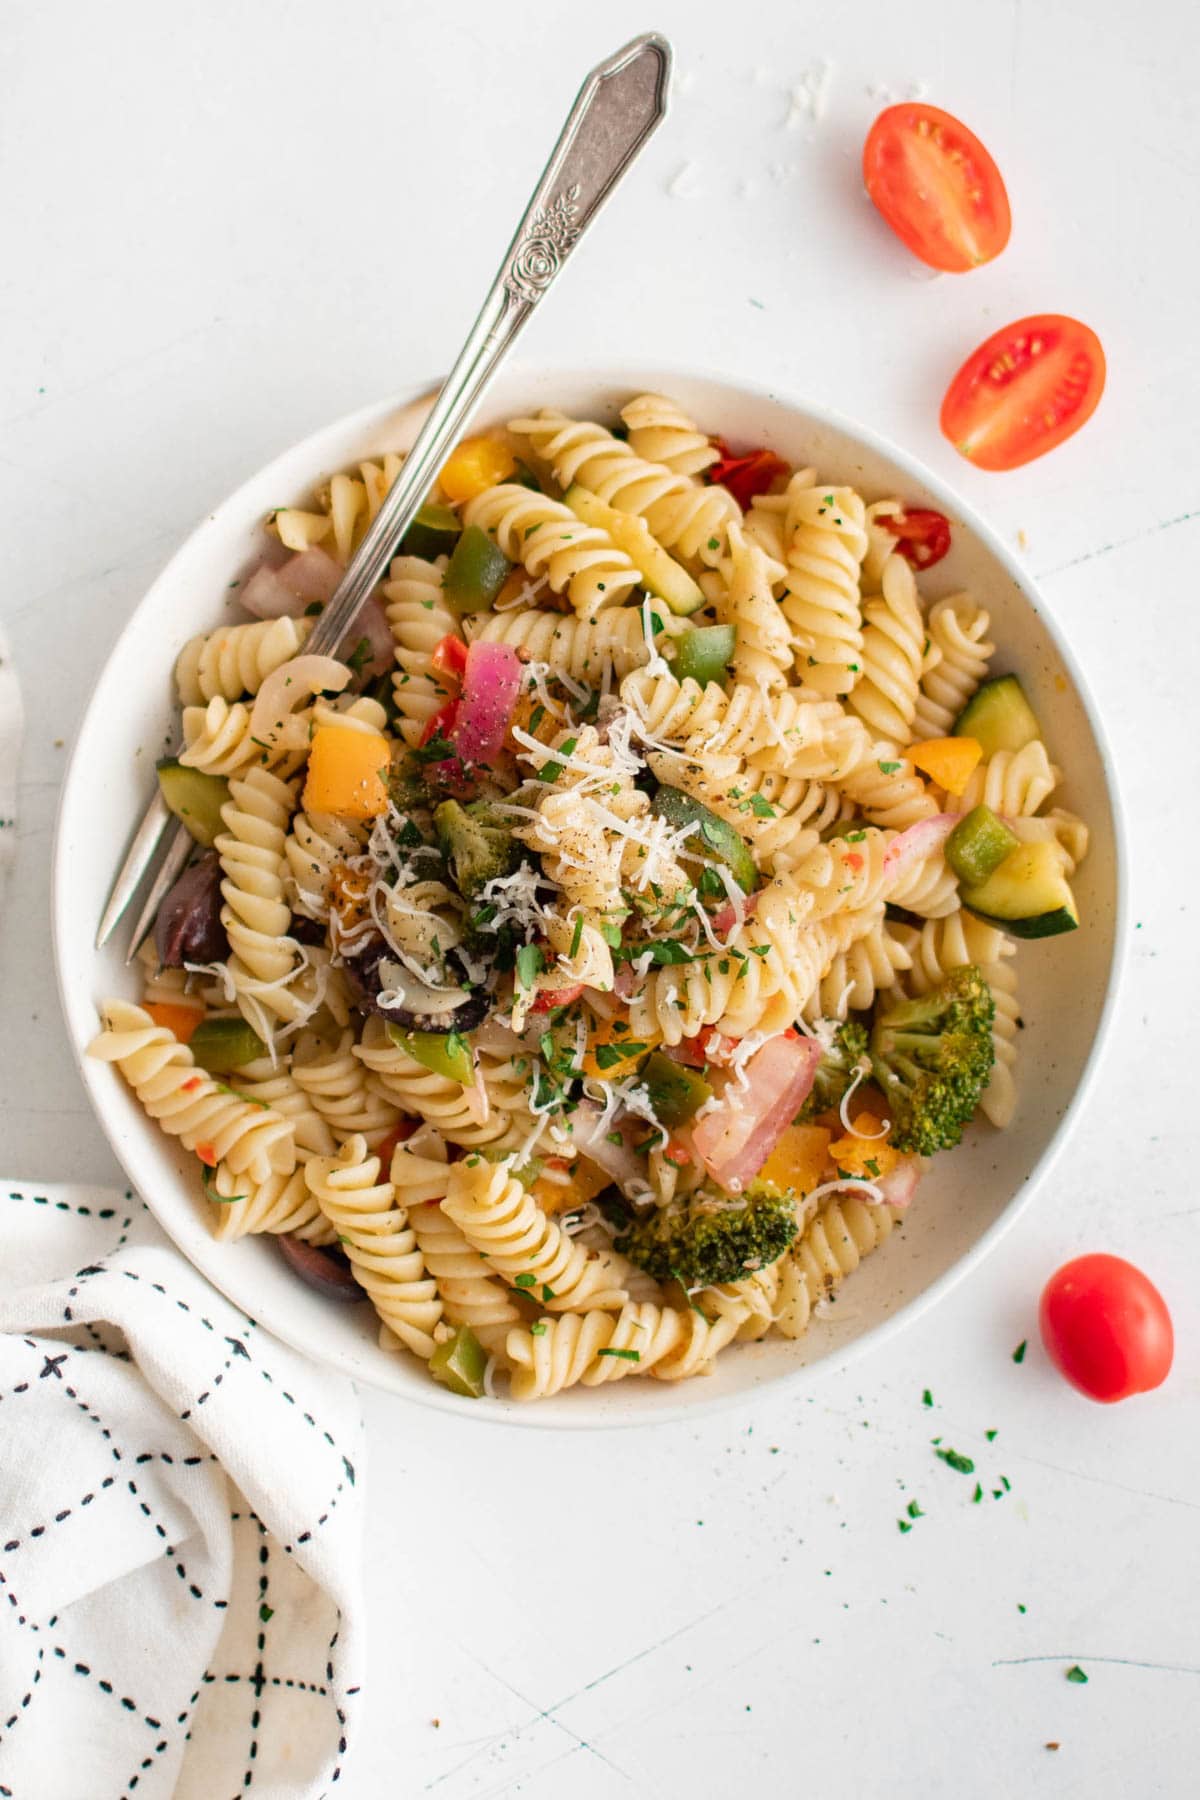 Rotini, vegetables, parmesan cheese in a small bowl with a fork.